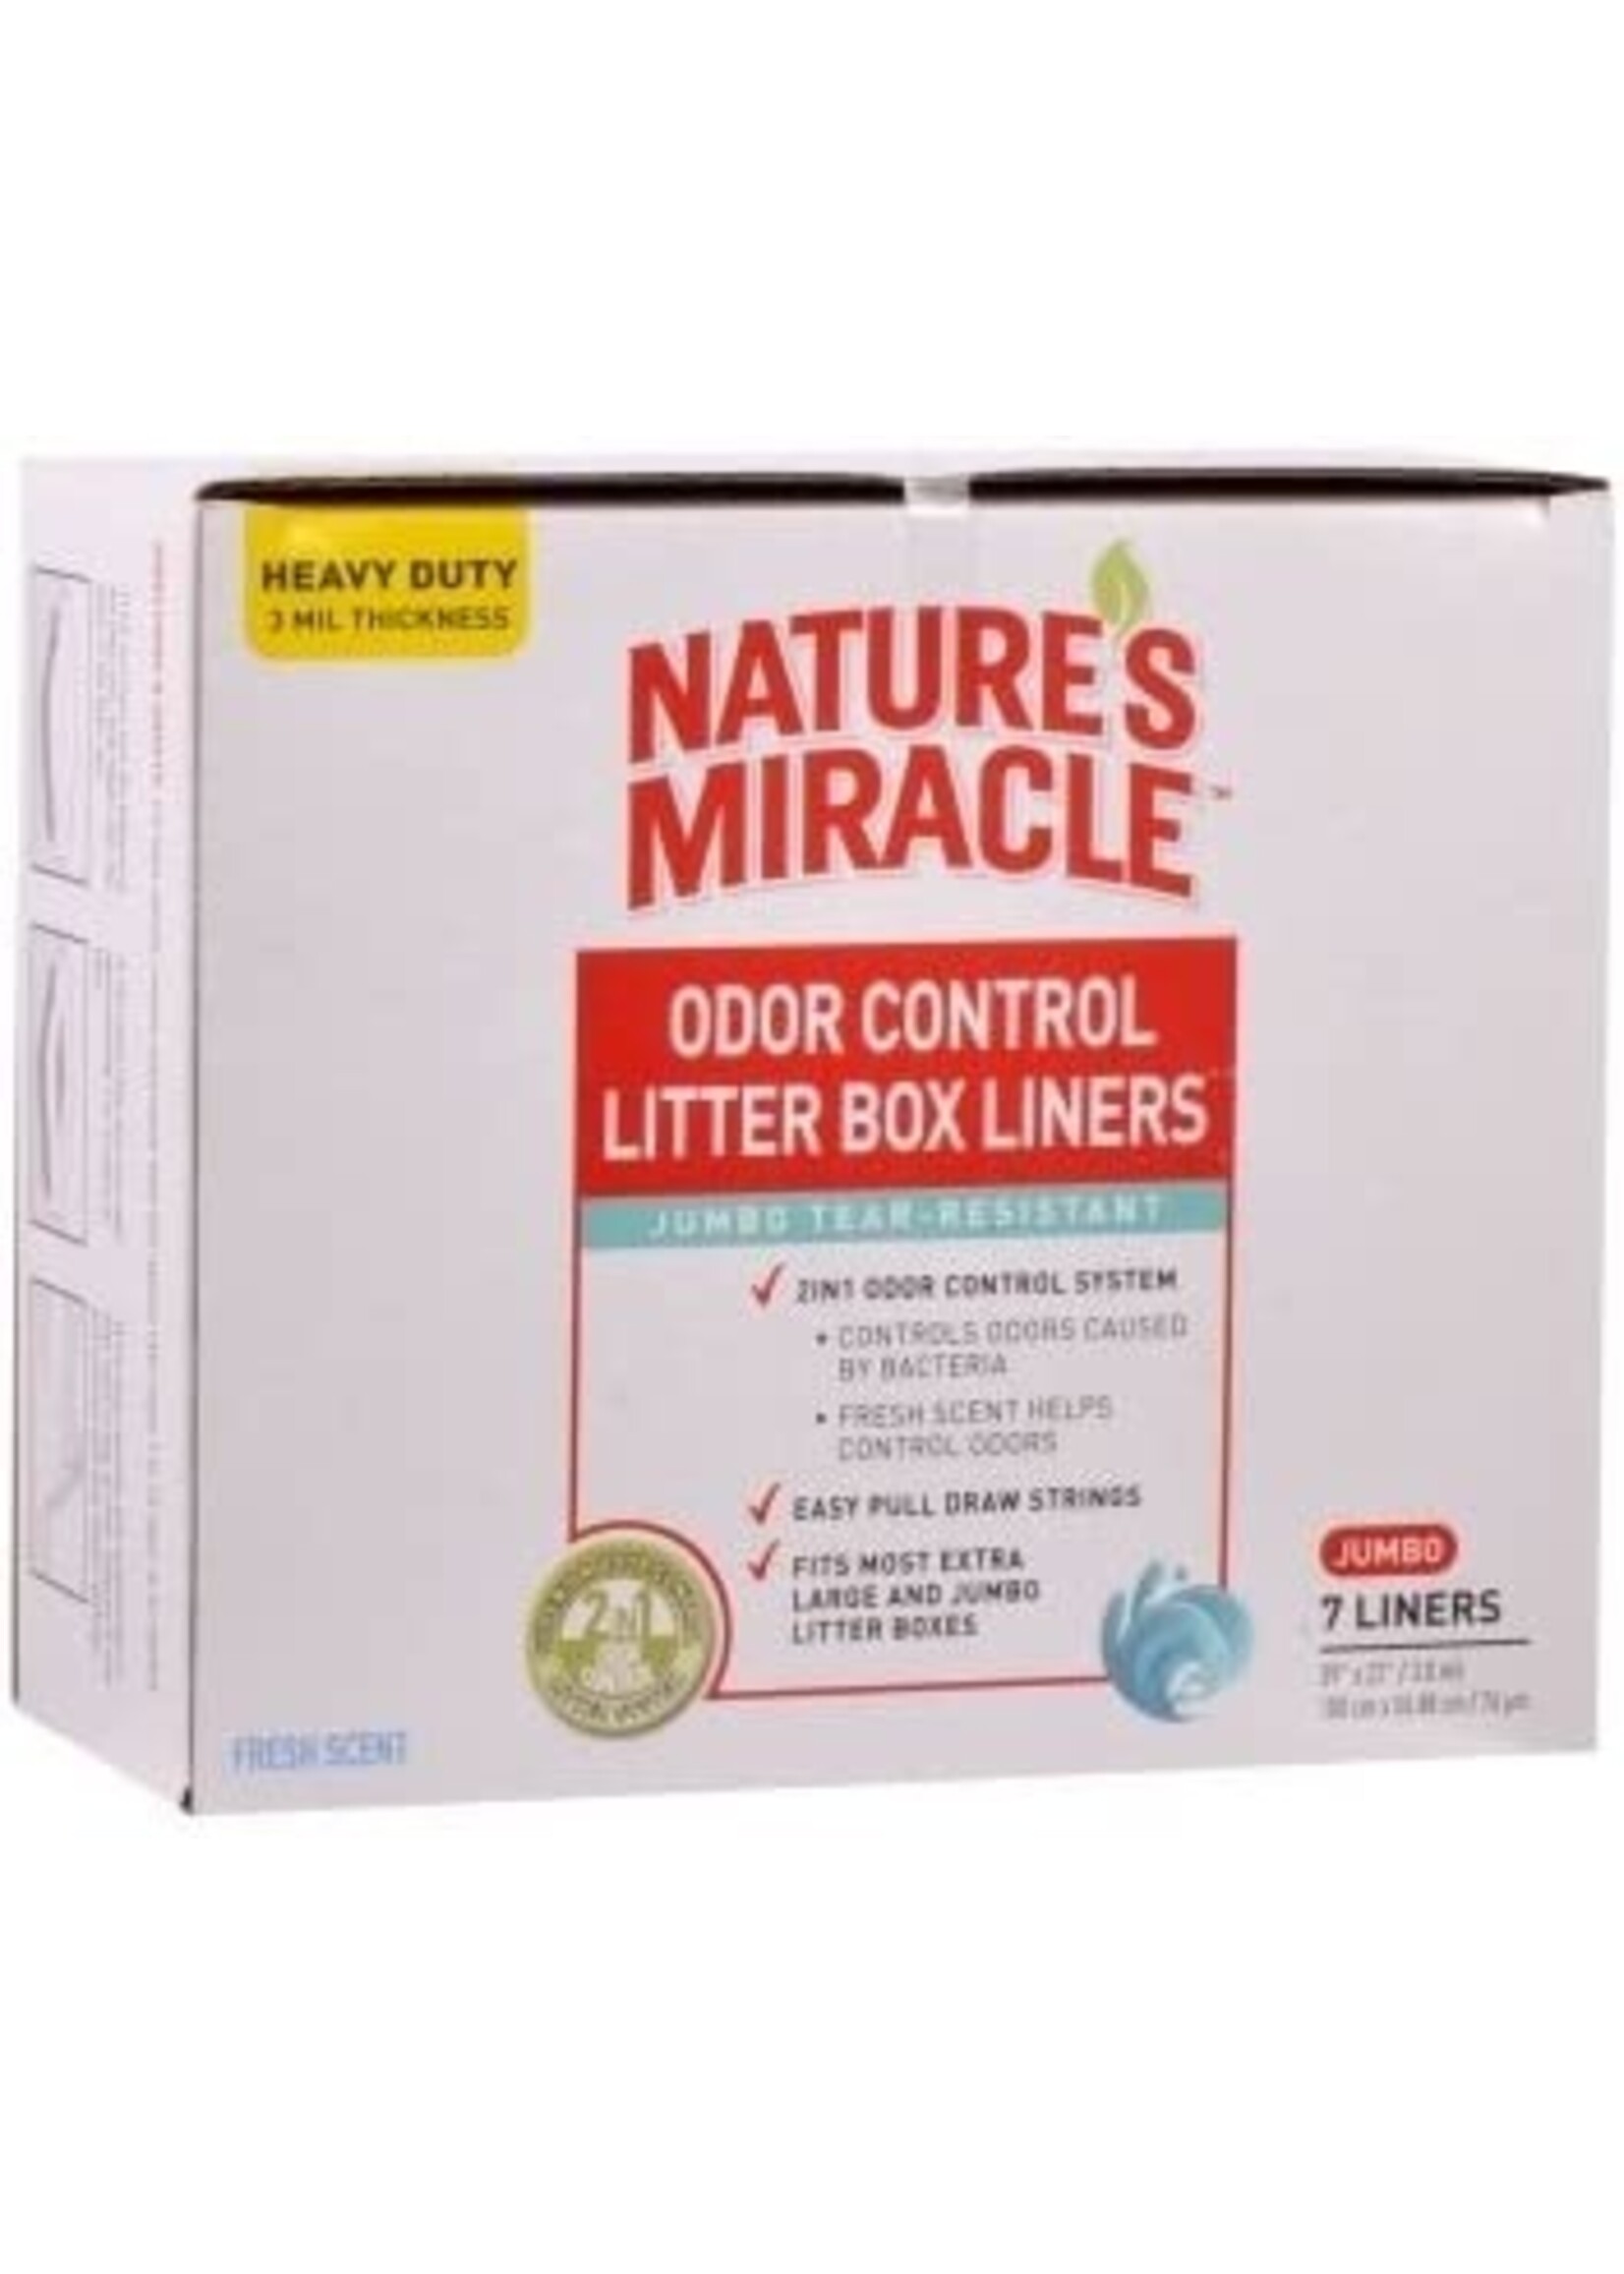 Nature's Miracle Nature's Miracle Odor Control Litter Box Liners 7Jumbo Fresh Scent